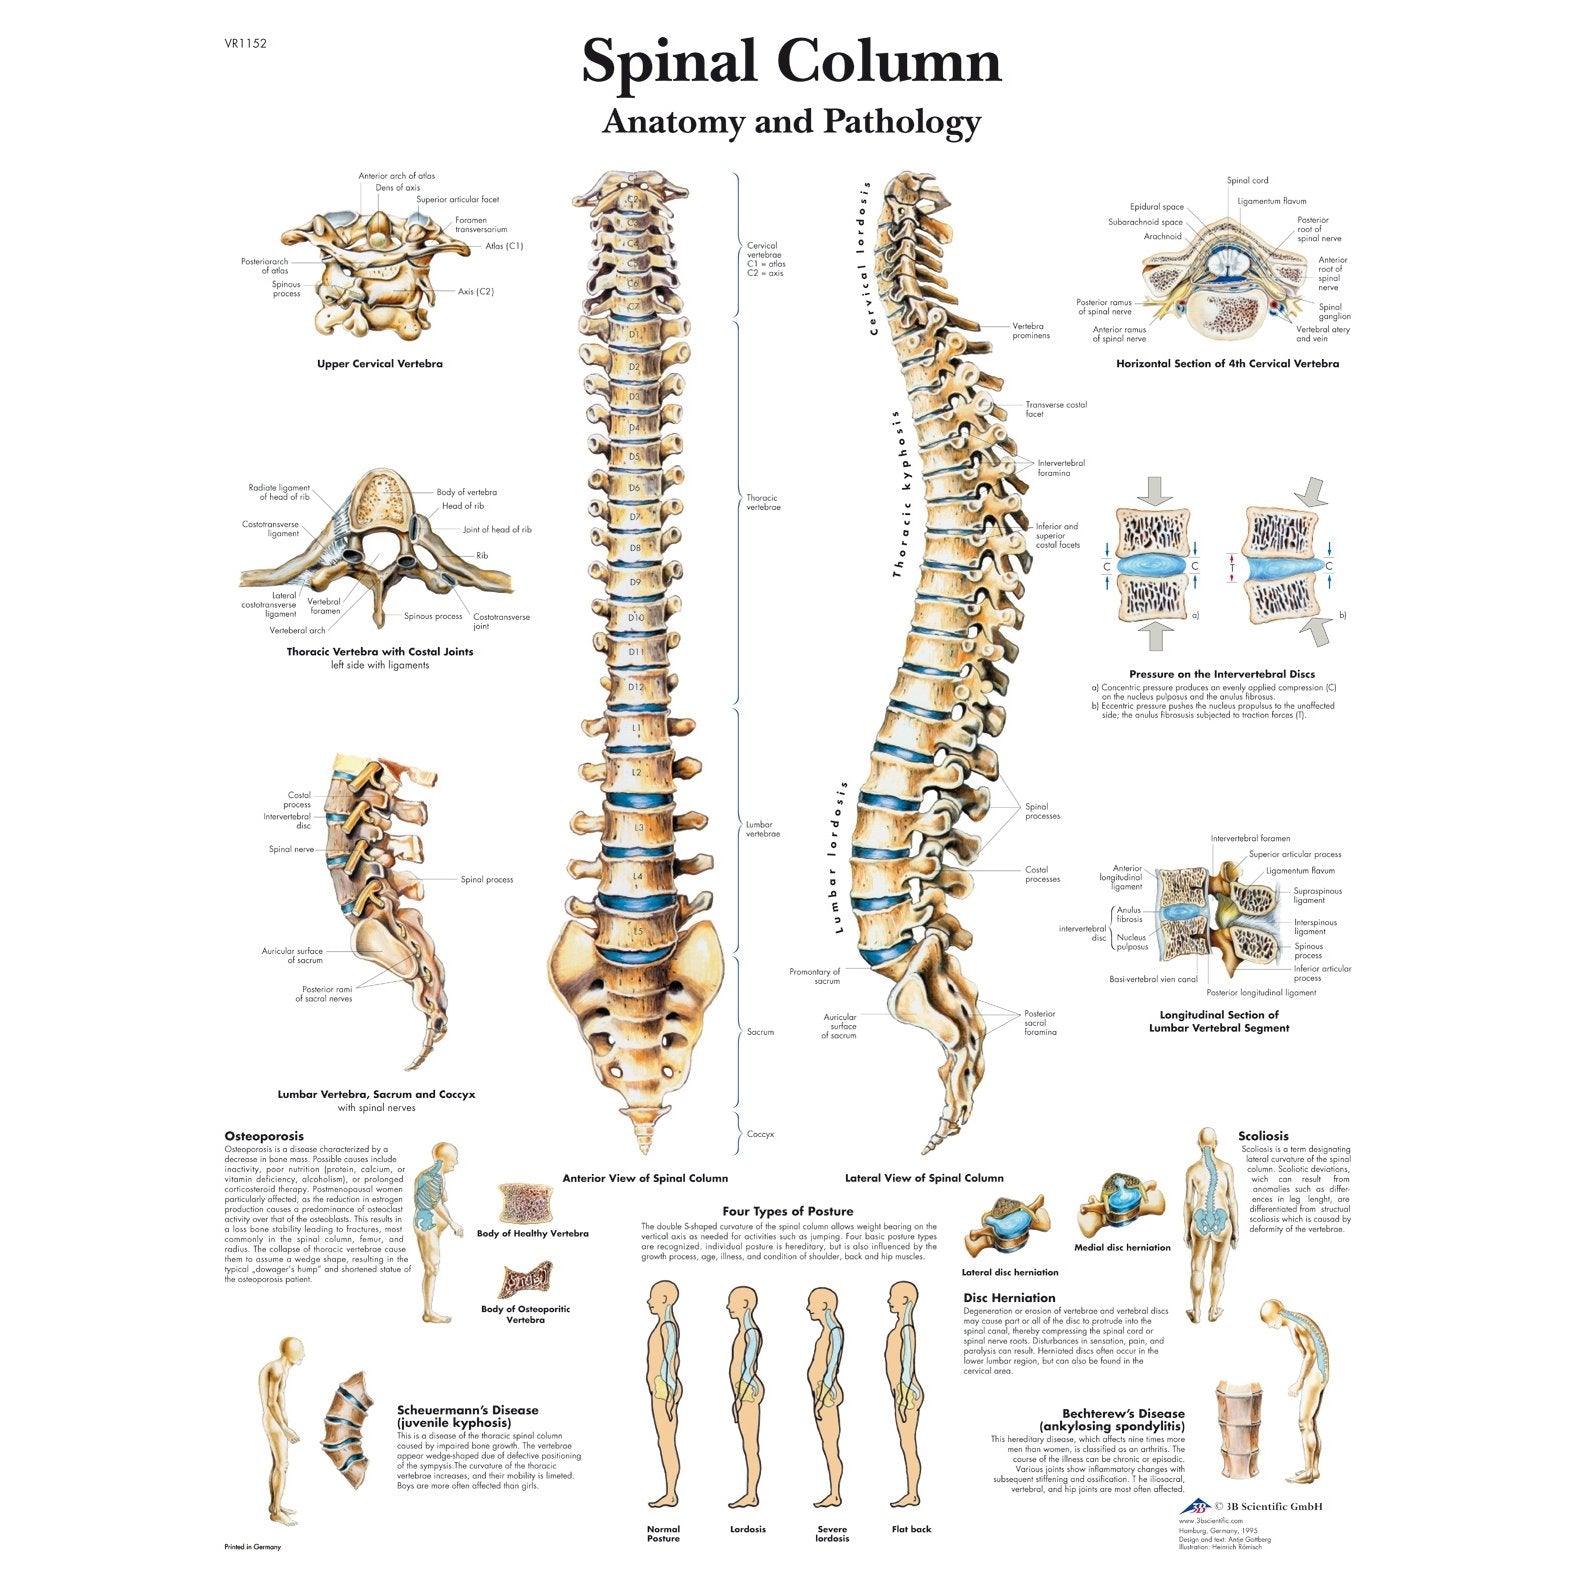 human spinal cord diagram labeled